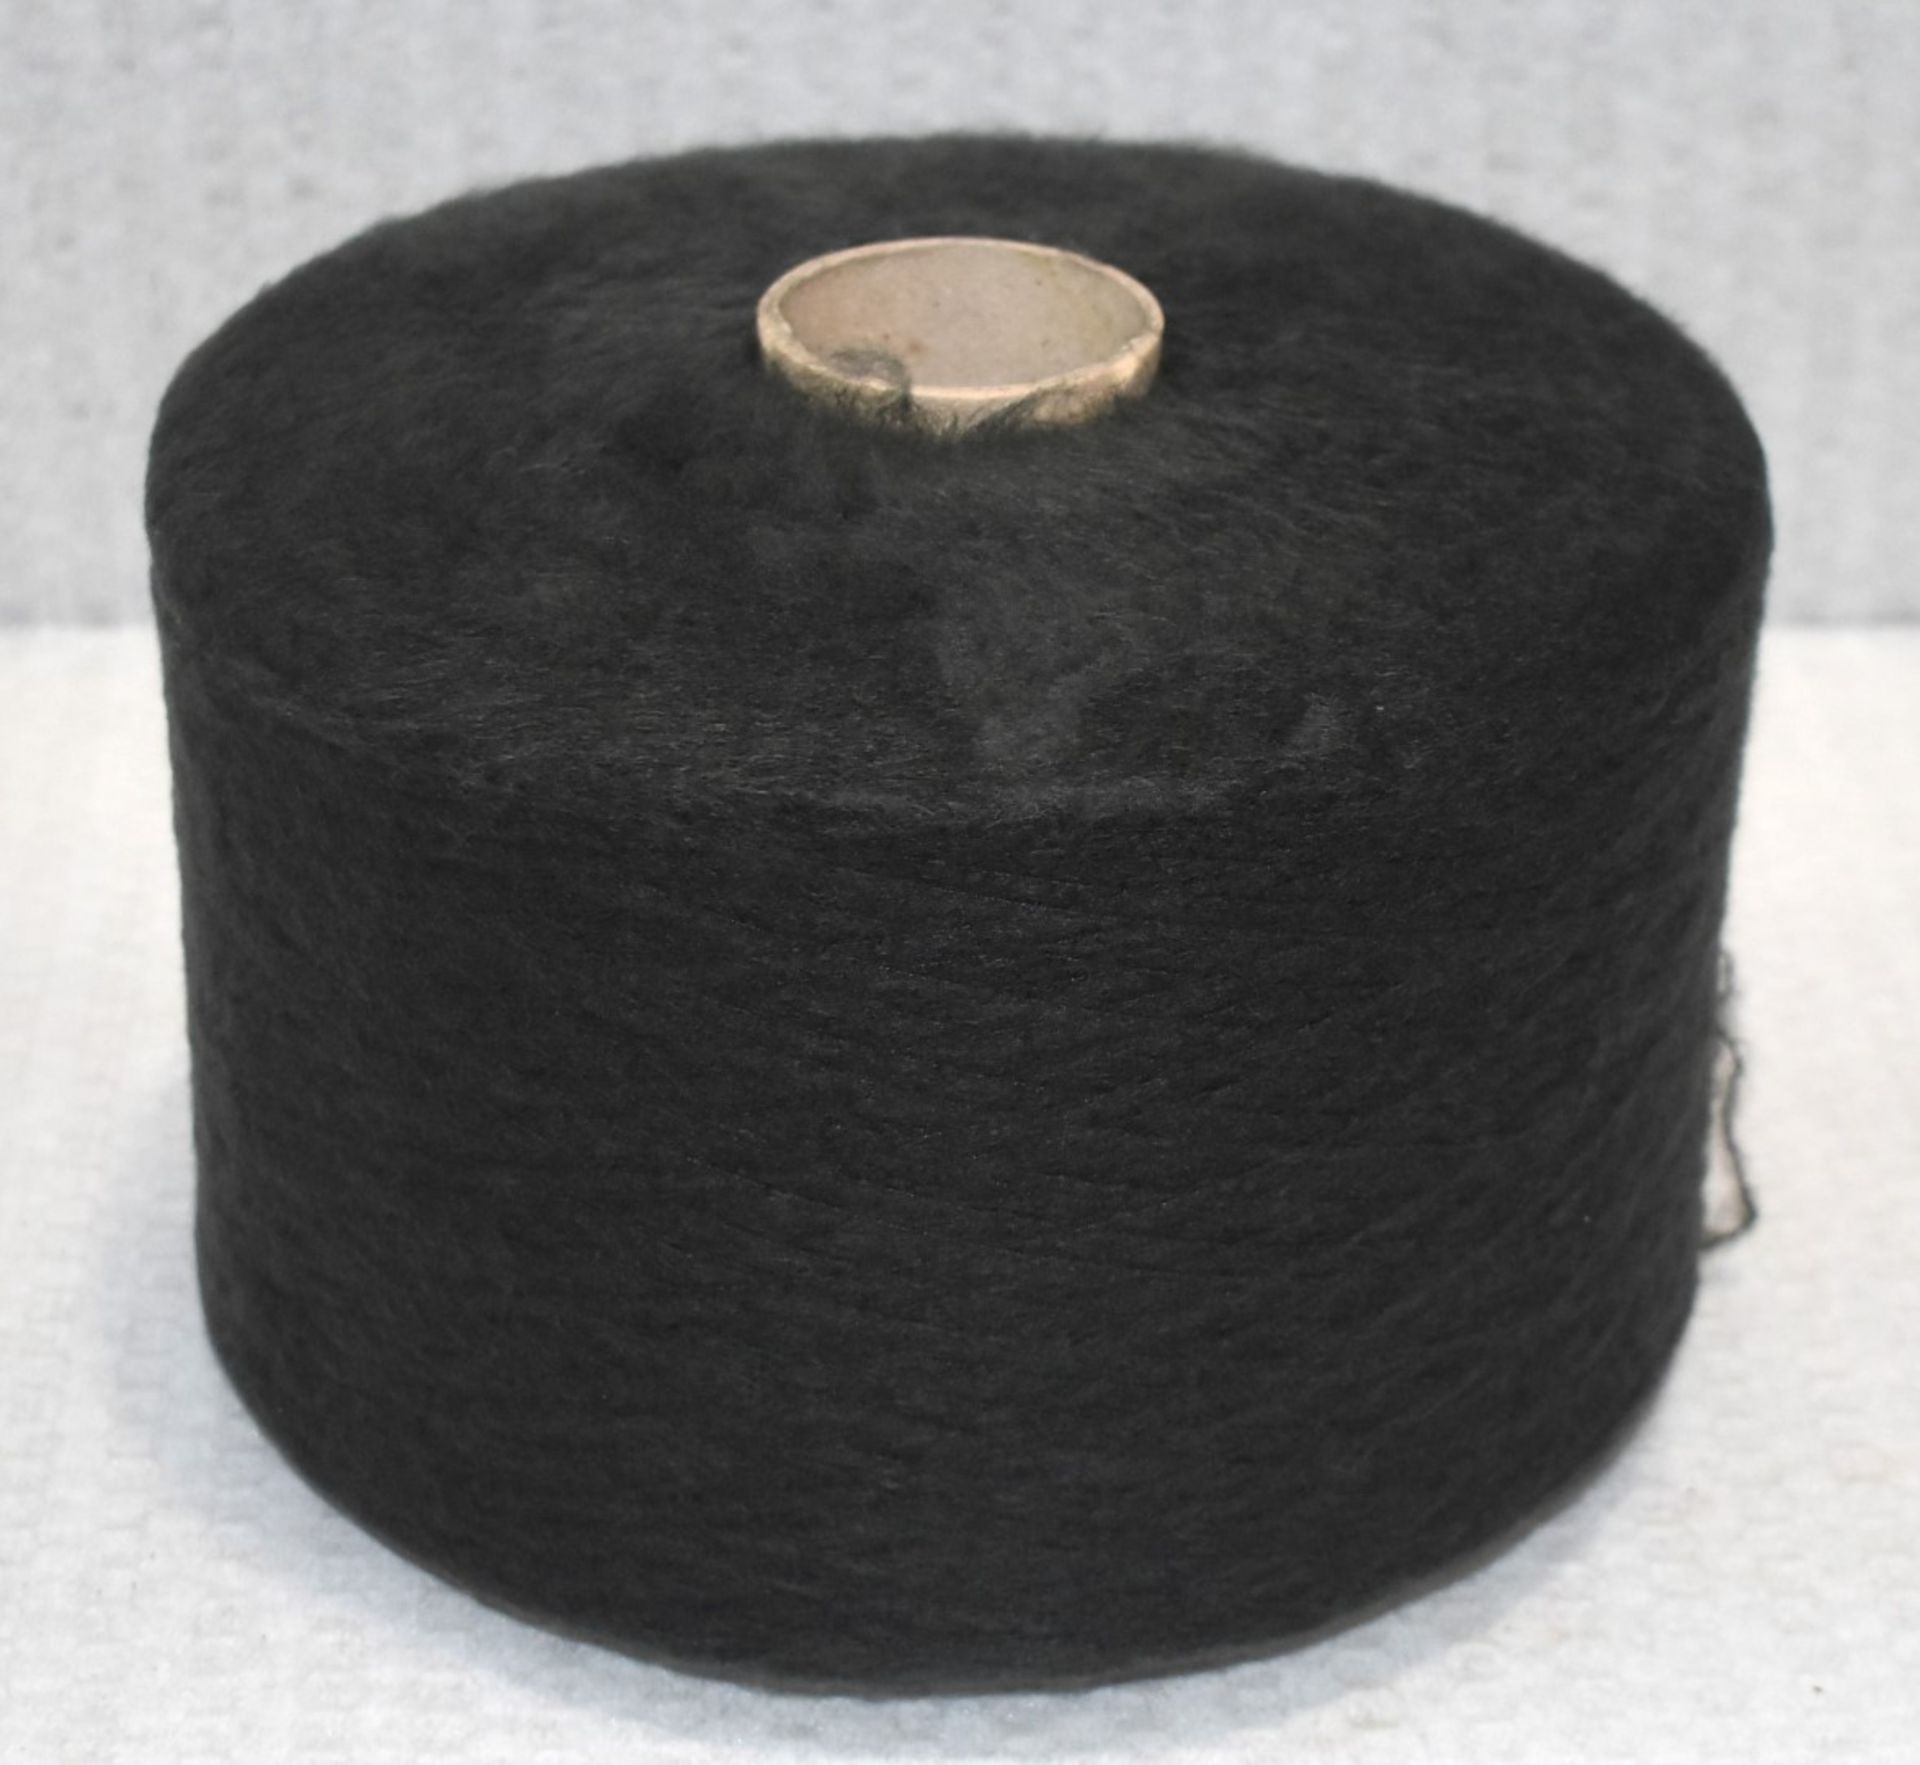 1 x Cone of 1/7,5 Lagona Knitting Yarn - Charcoal - Approx Weight: 2,300g - New Stock ABL Yarn - Image 5 of 10